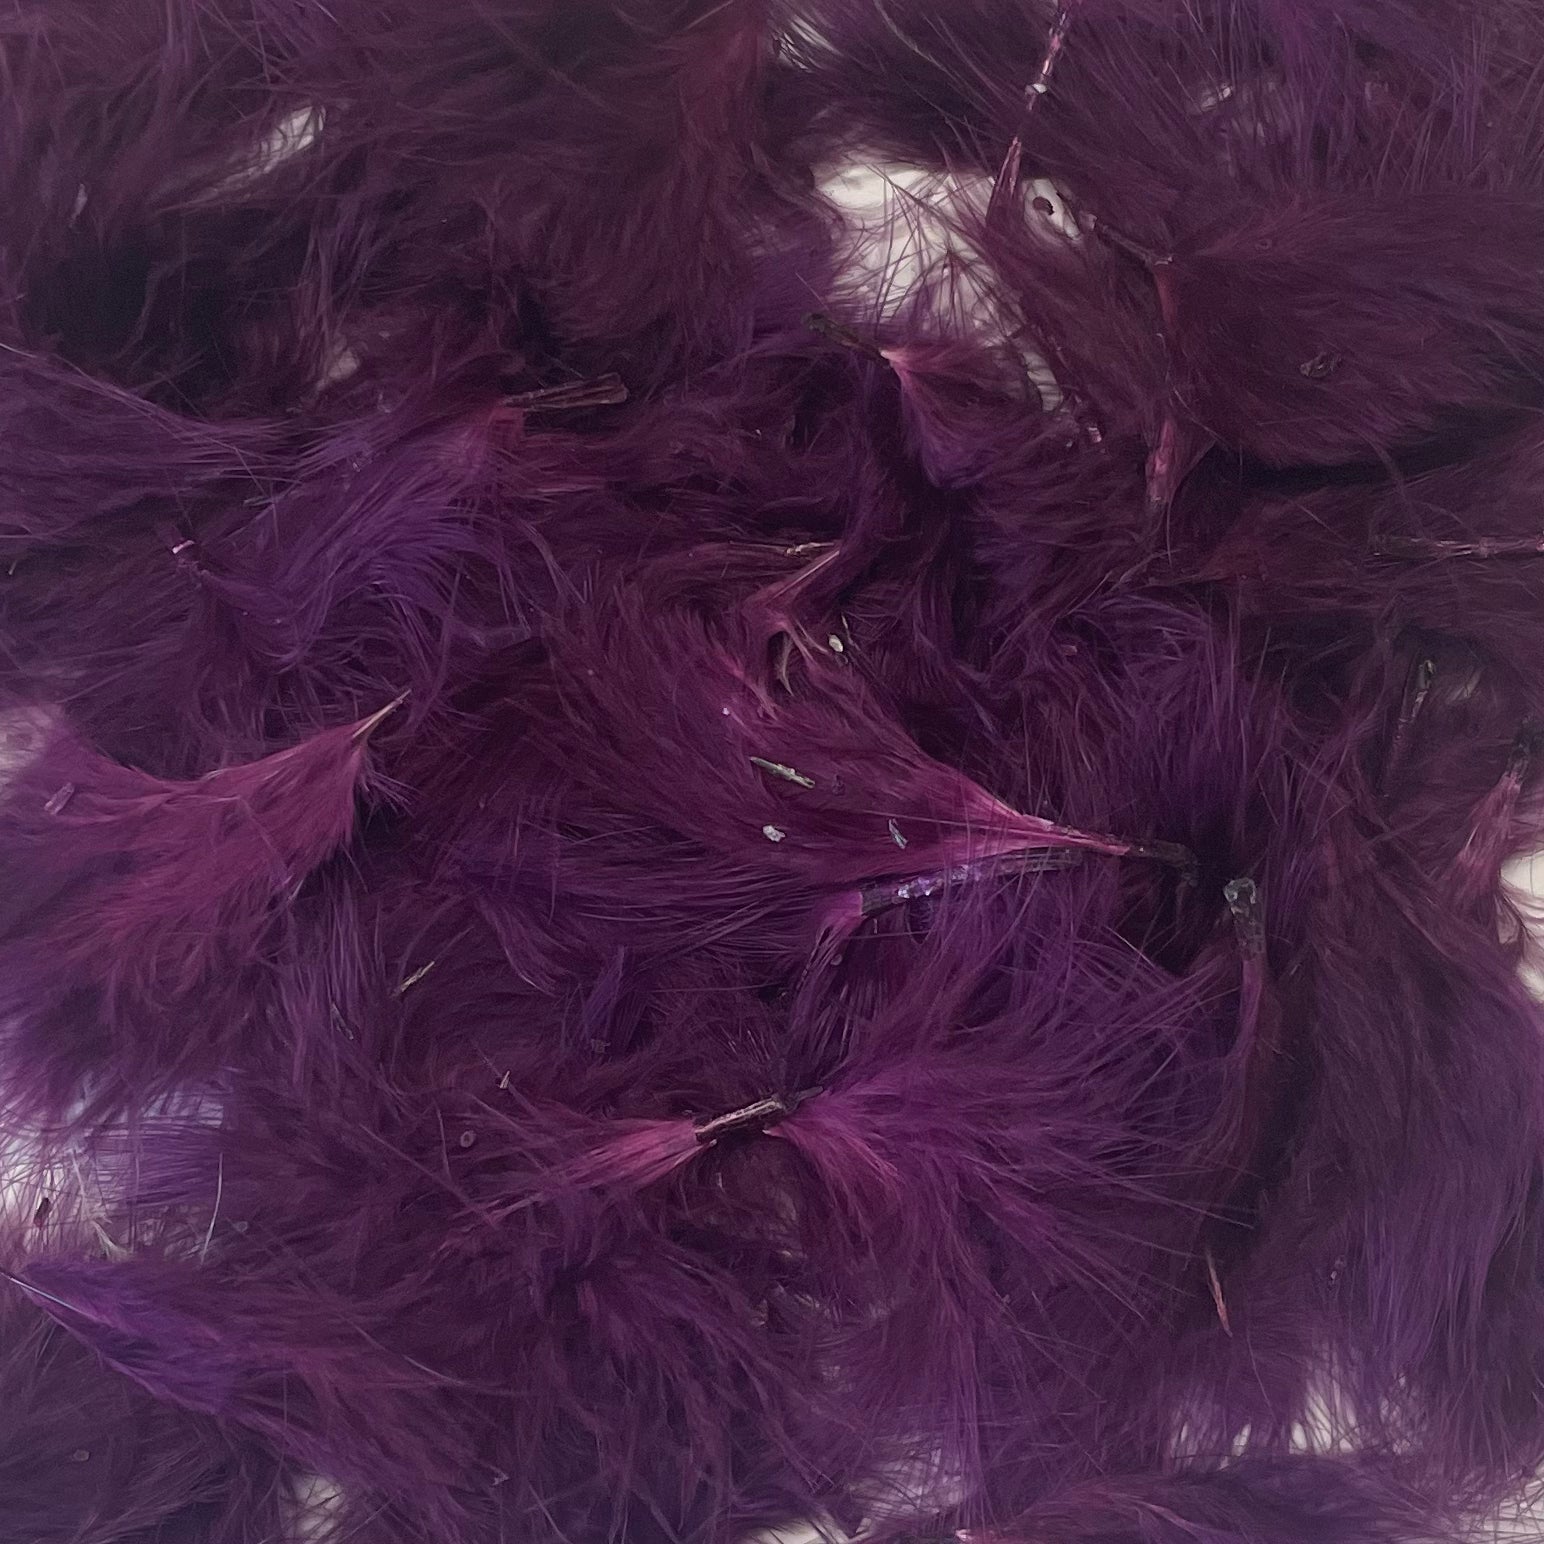 Itty Bitty Marabou Feather Plumage Pack 10 grams - Eggplant